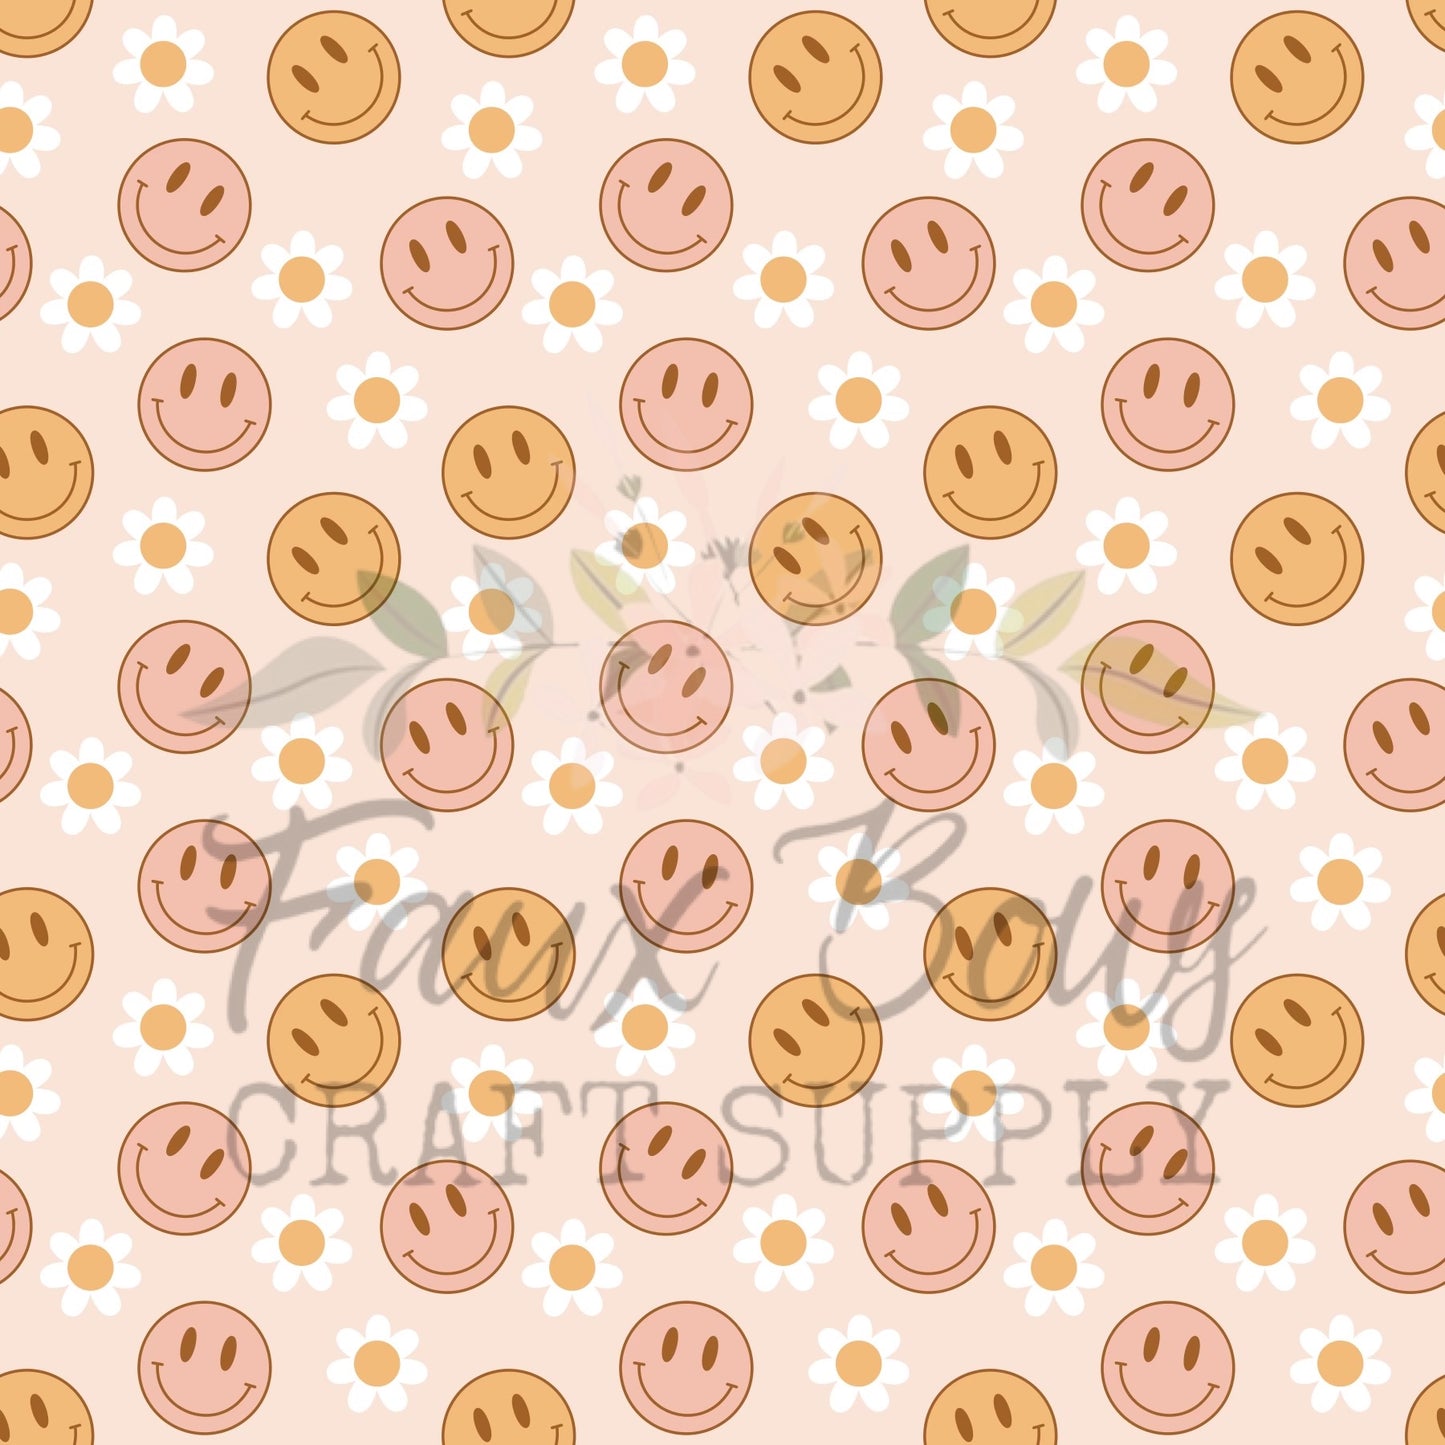 💜Passion Muted Smiley Face PRINTED Fabric Bullet/DBP/Leather